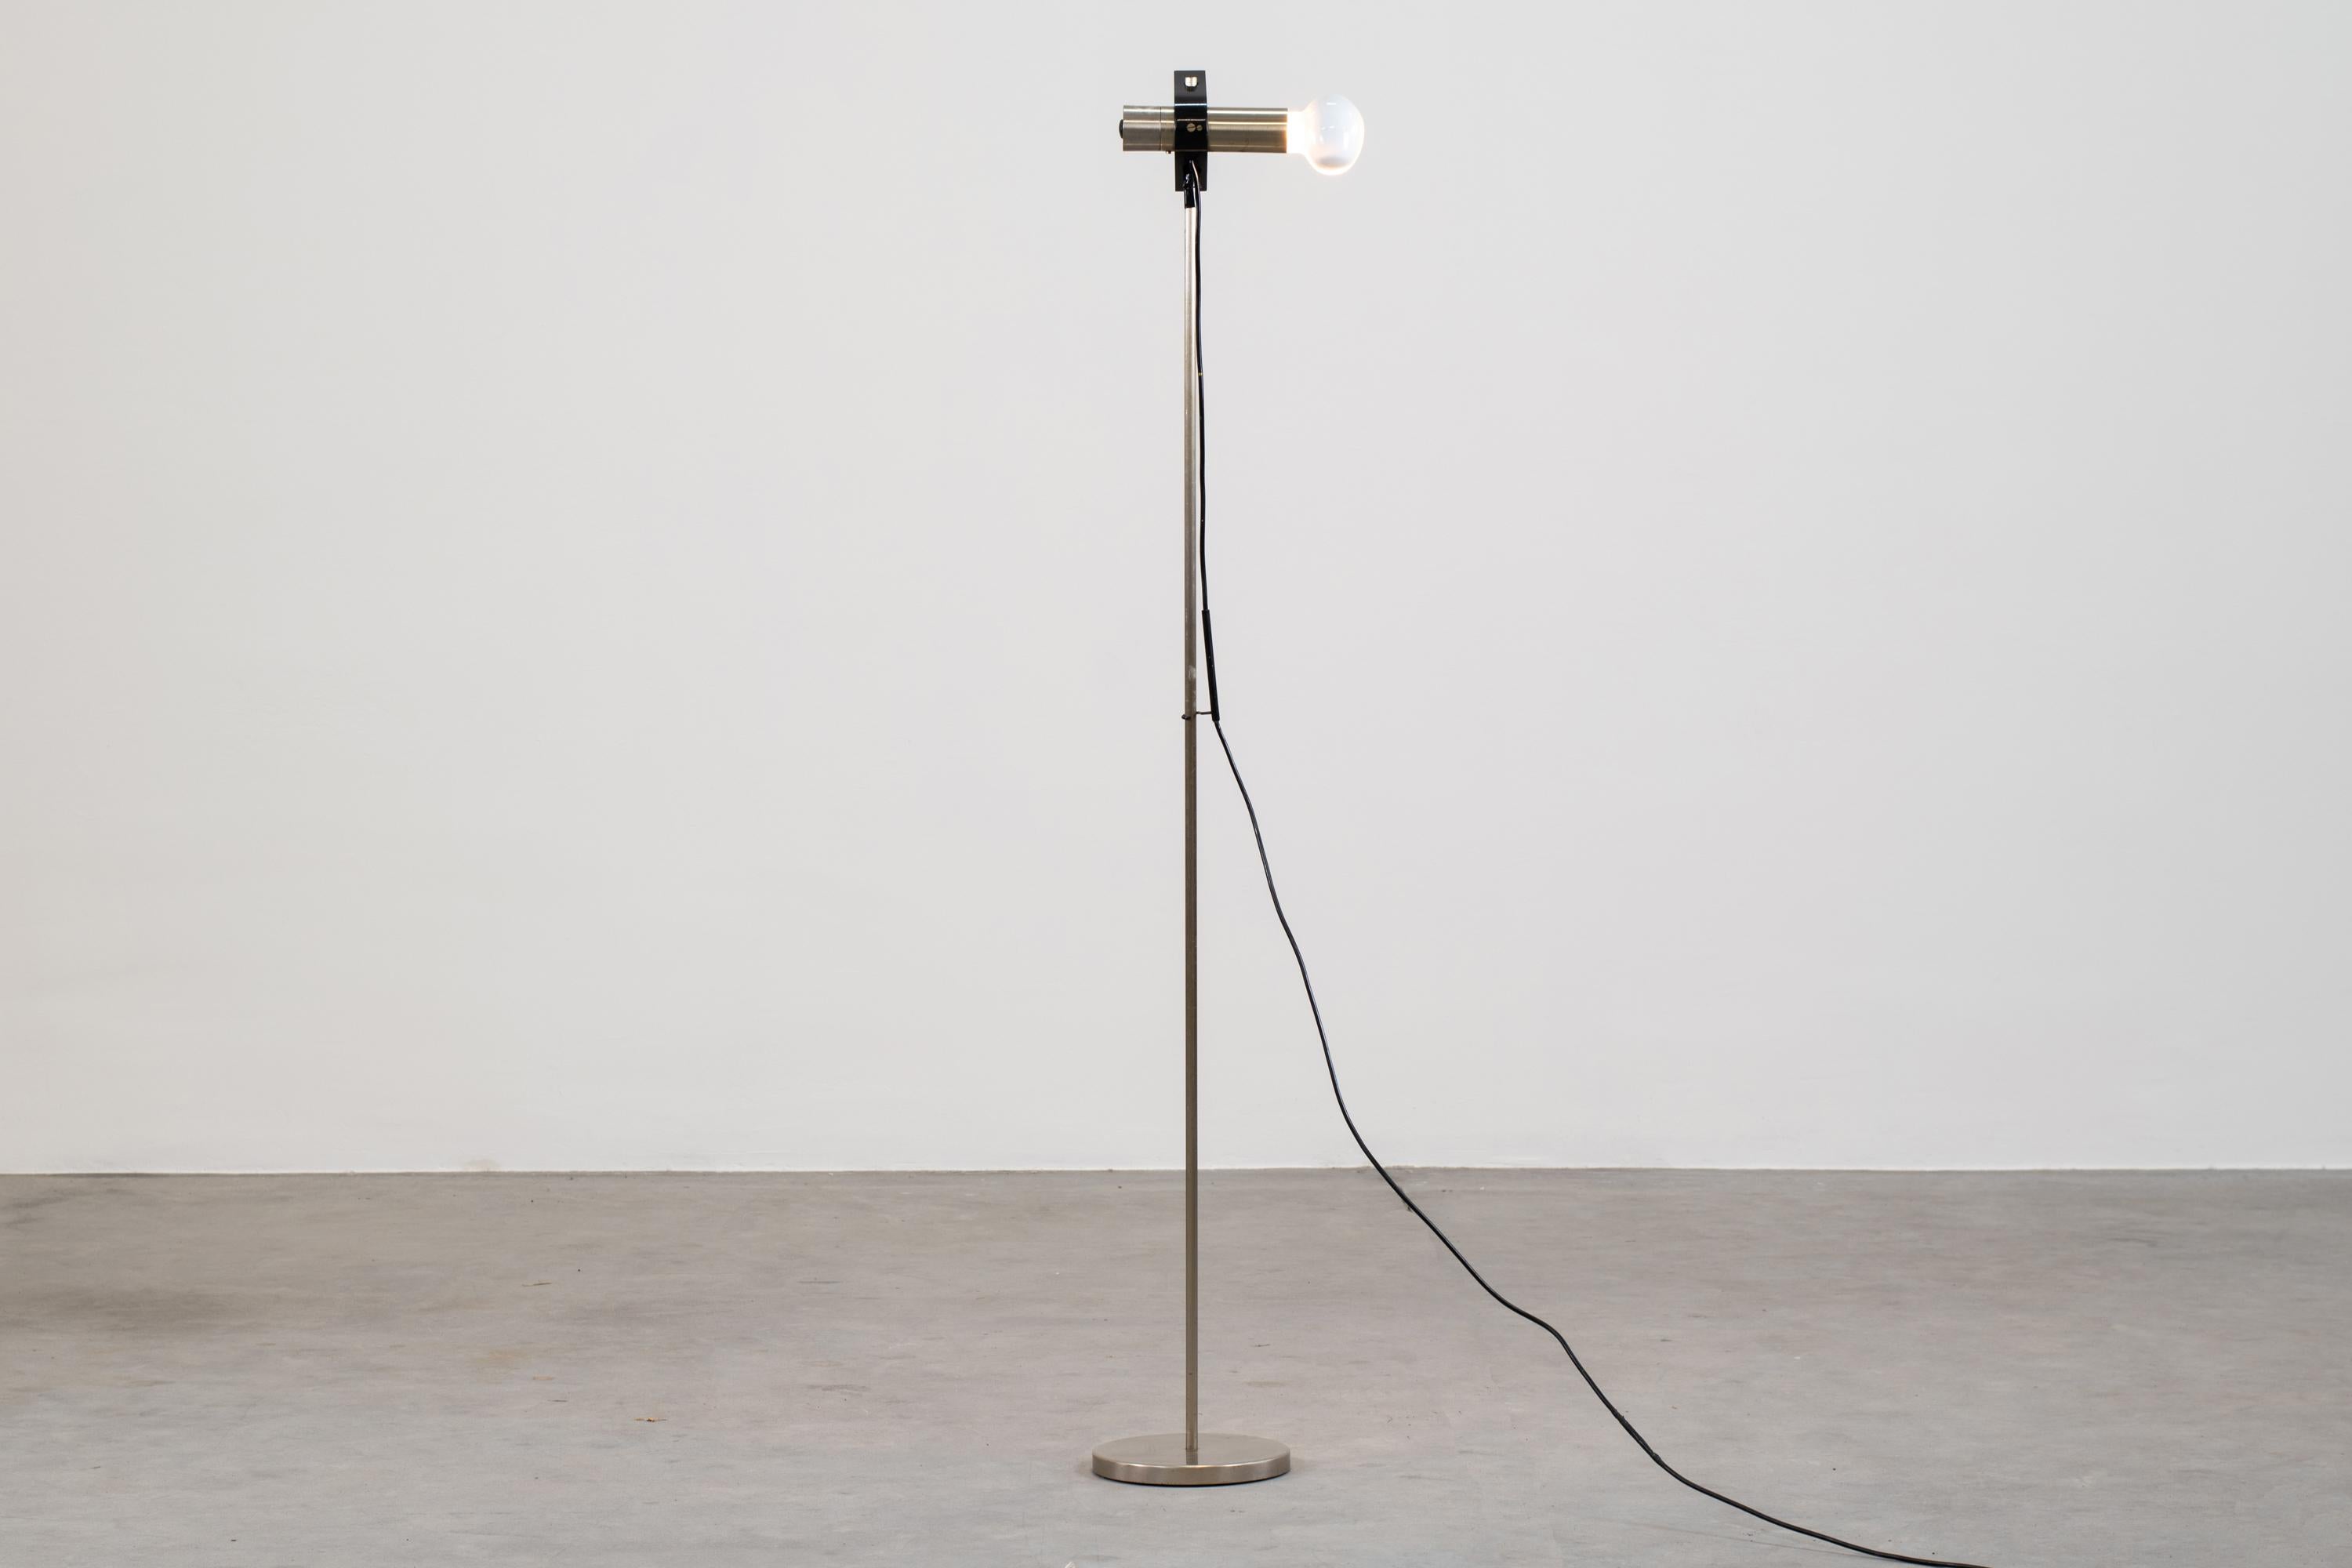 Floor lamp model 399 (from cornalux series) with structure in nickel-plated metal, lacquered metal and cast iron.

The lamp bulb is adjustable in height achieved by a bracket that allows the lamp to be slid up and down the lamp stem.

This lamp was